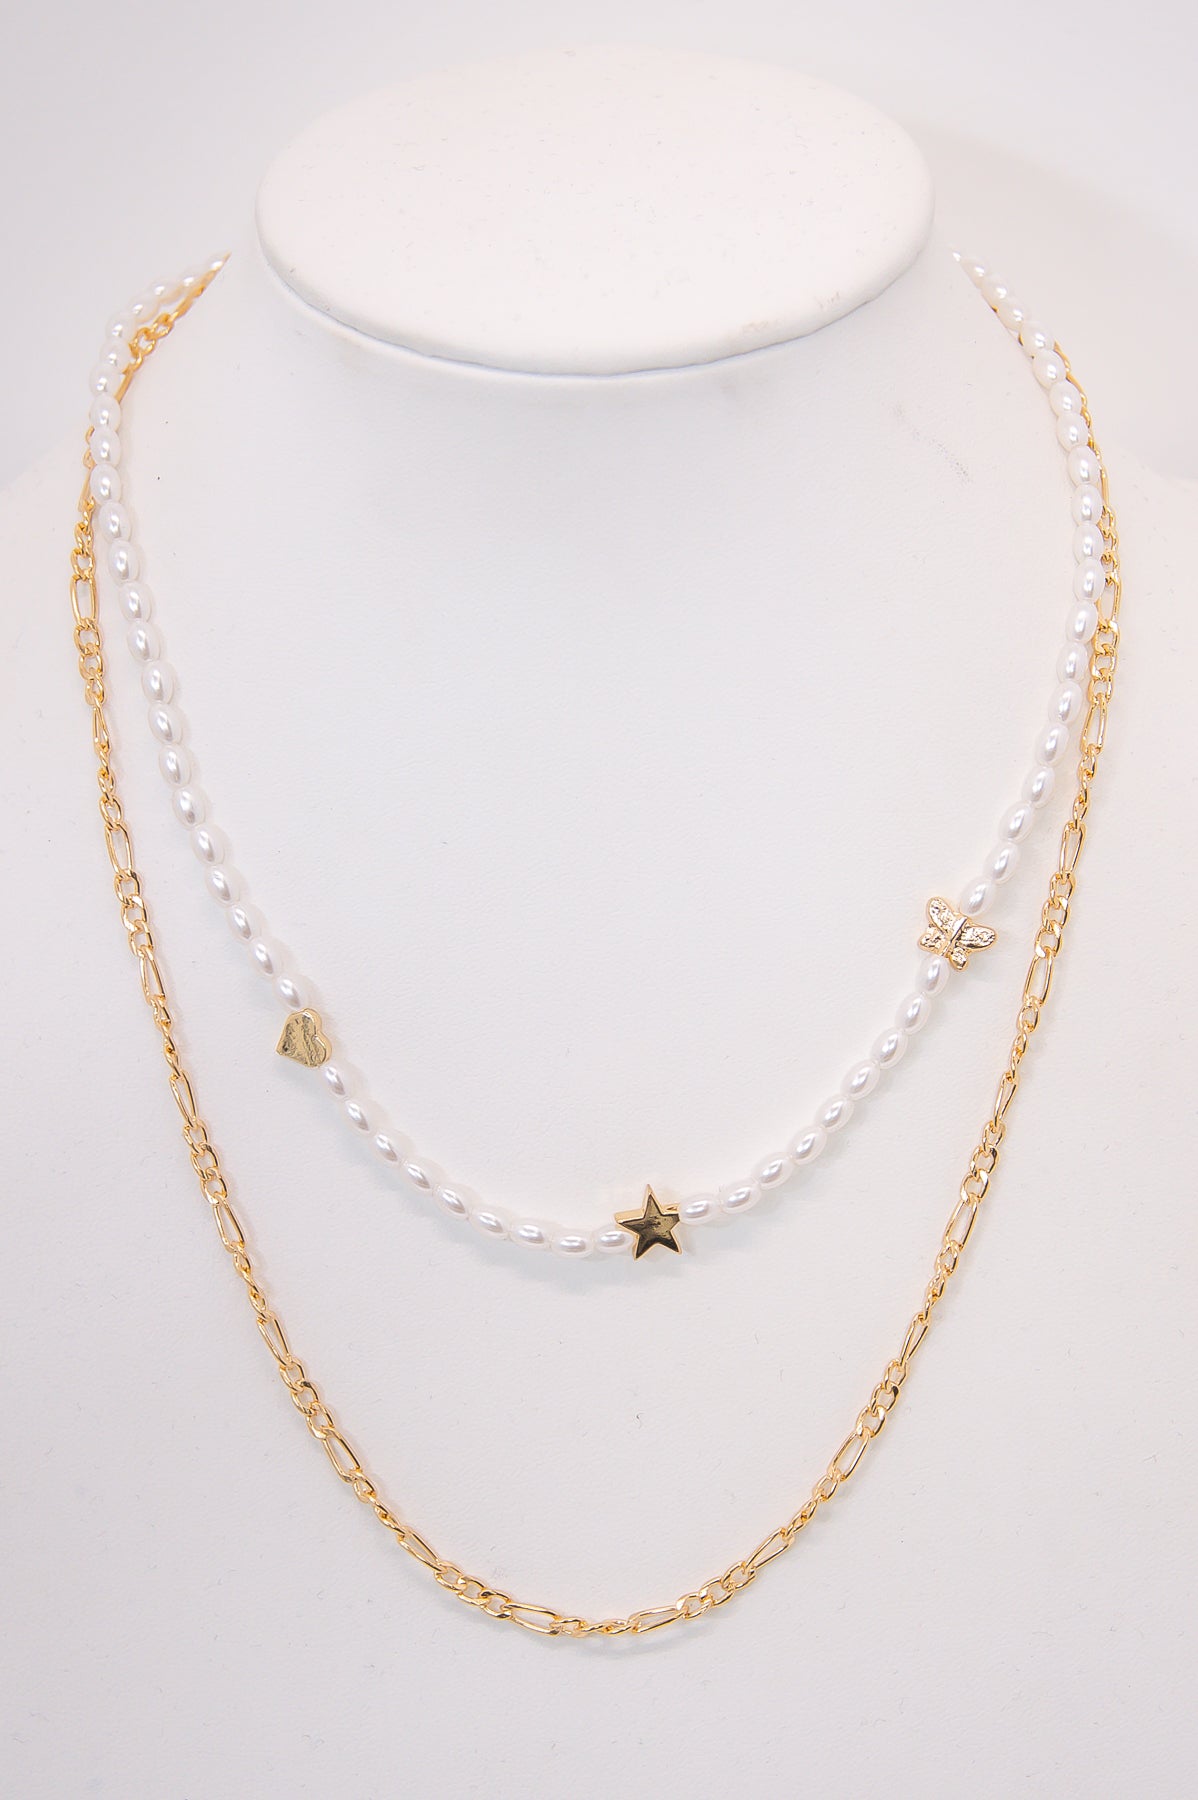 Gold Heart/Star/Butterfly Charm Pearl/Chain Layered Necklace - NEK4286GD